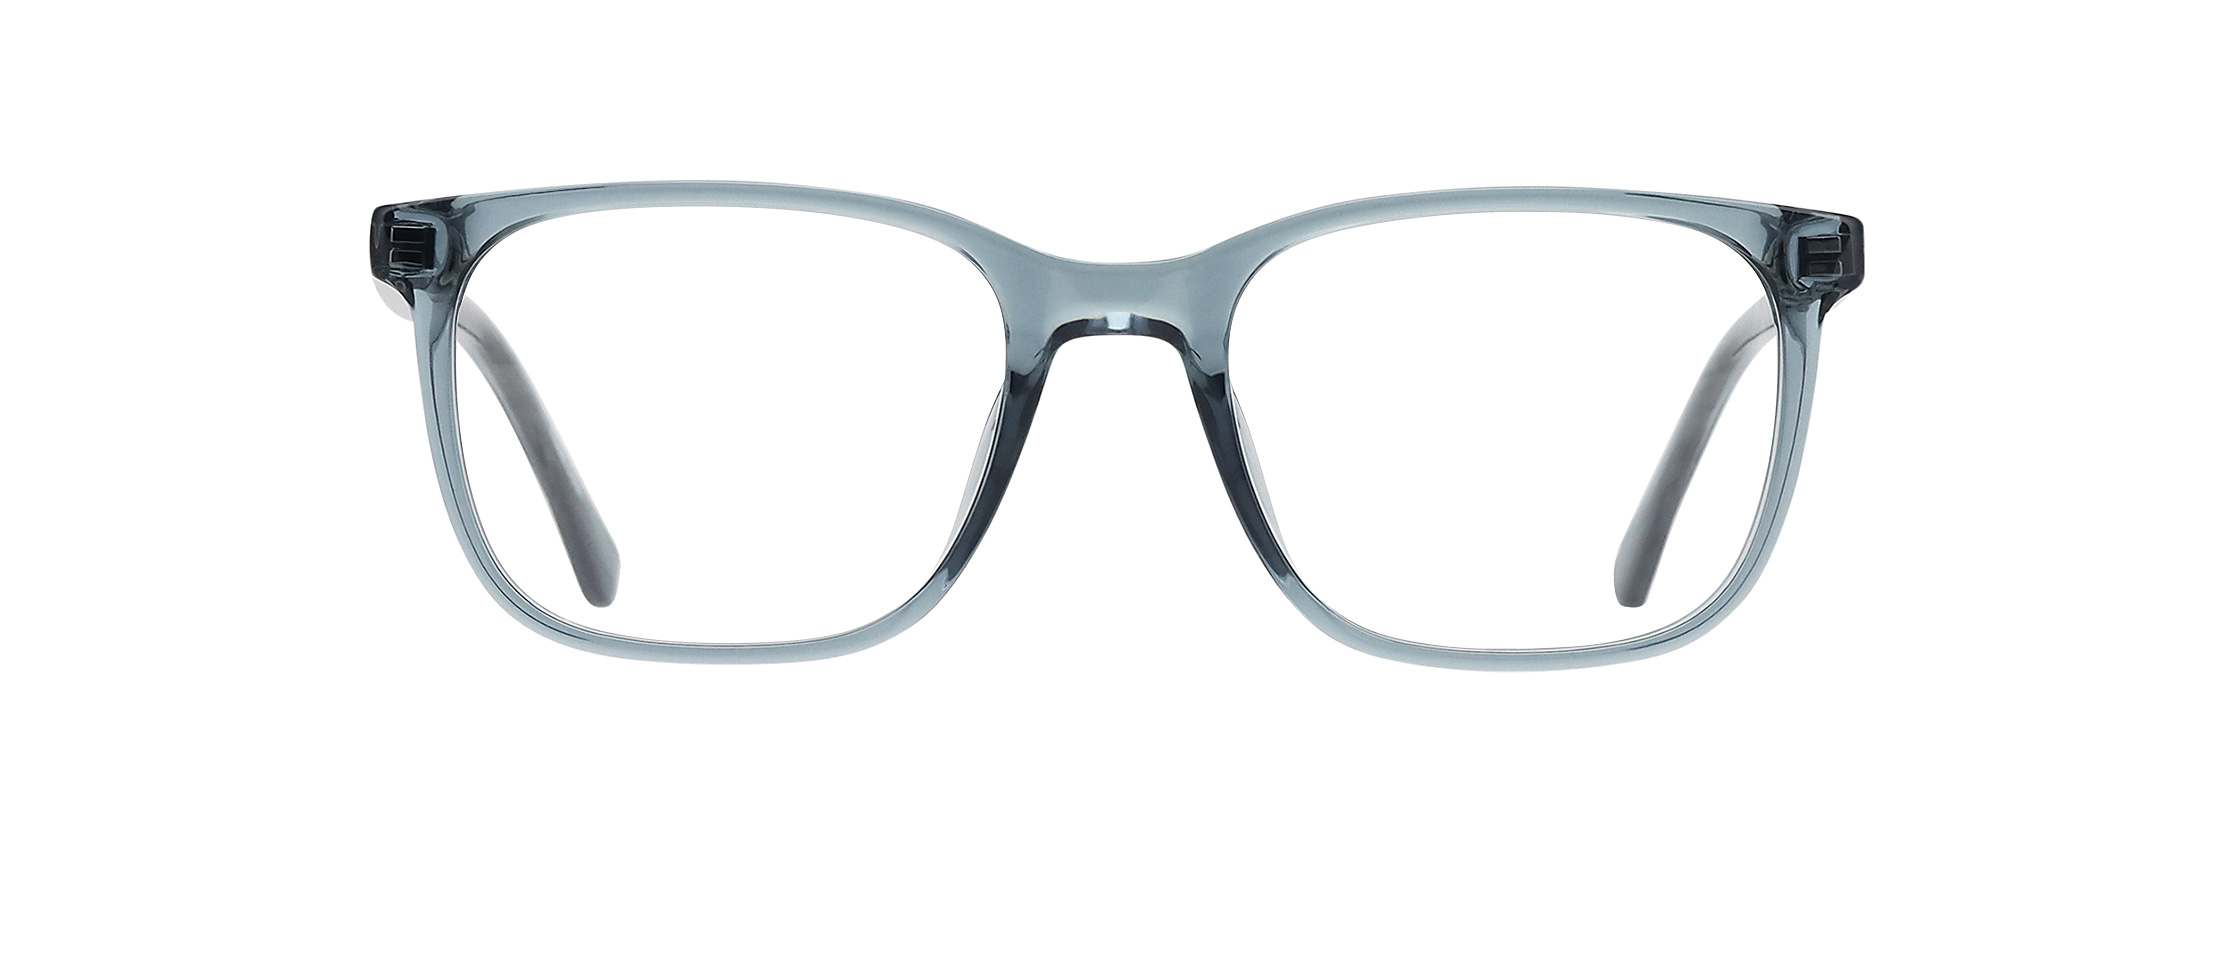 Calvin Klein CK21500 Glasses | Free Shipping and Returns | Eyeconic